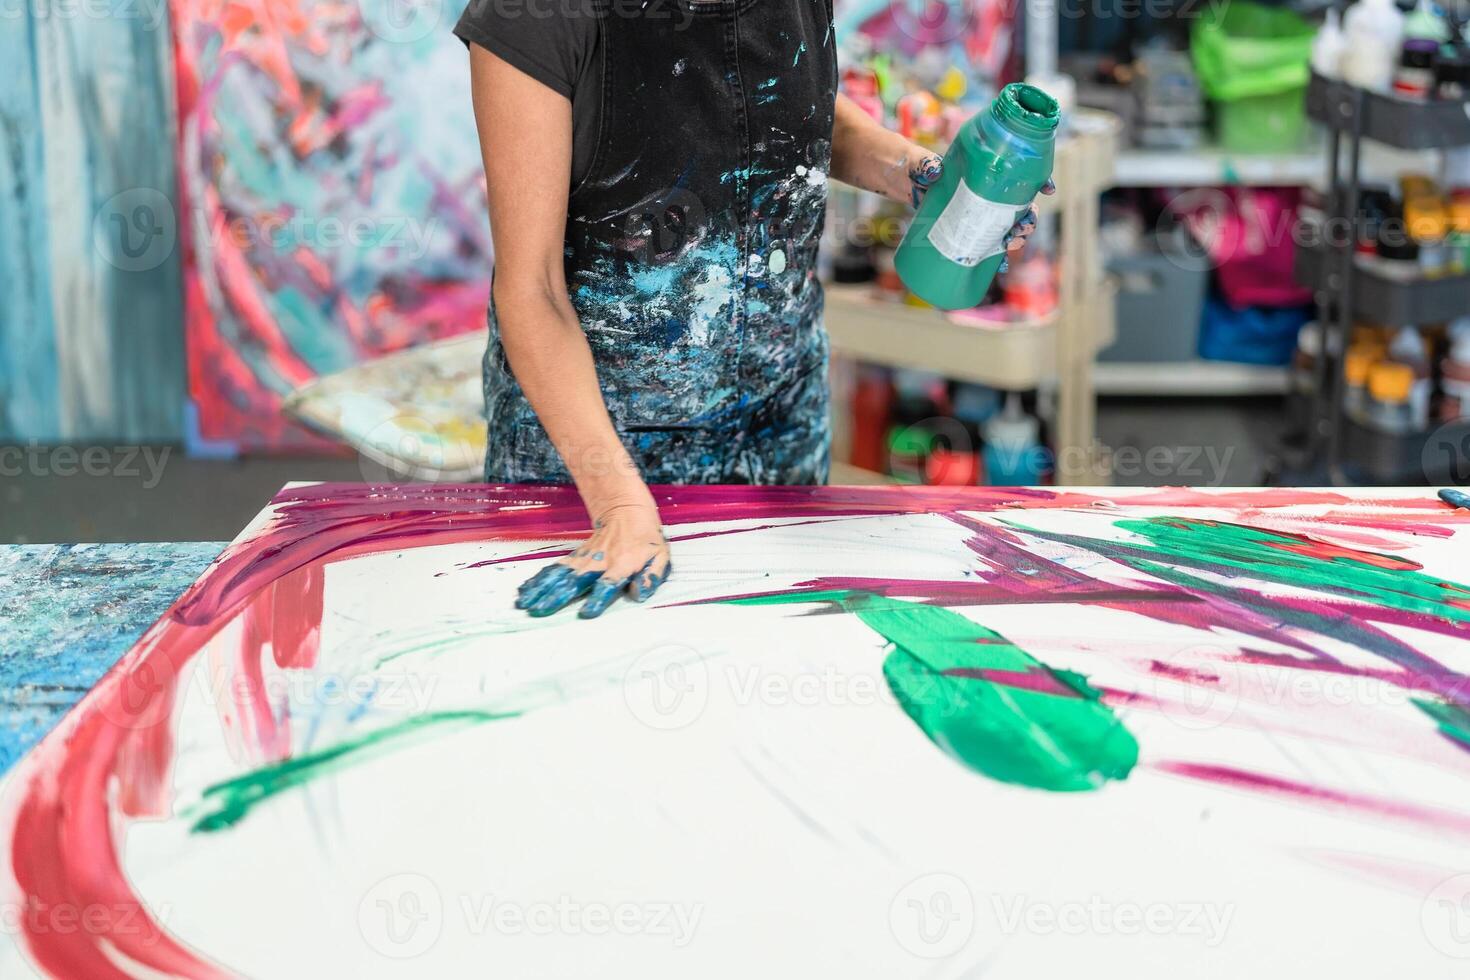 Woman artist painting with hands on canvas in workshop studio - Painter work and creative craft concept photo